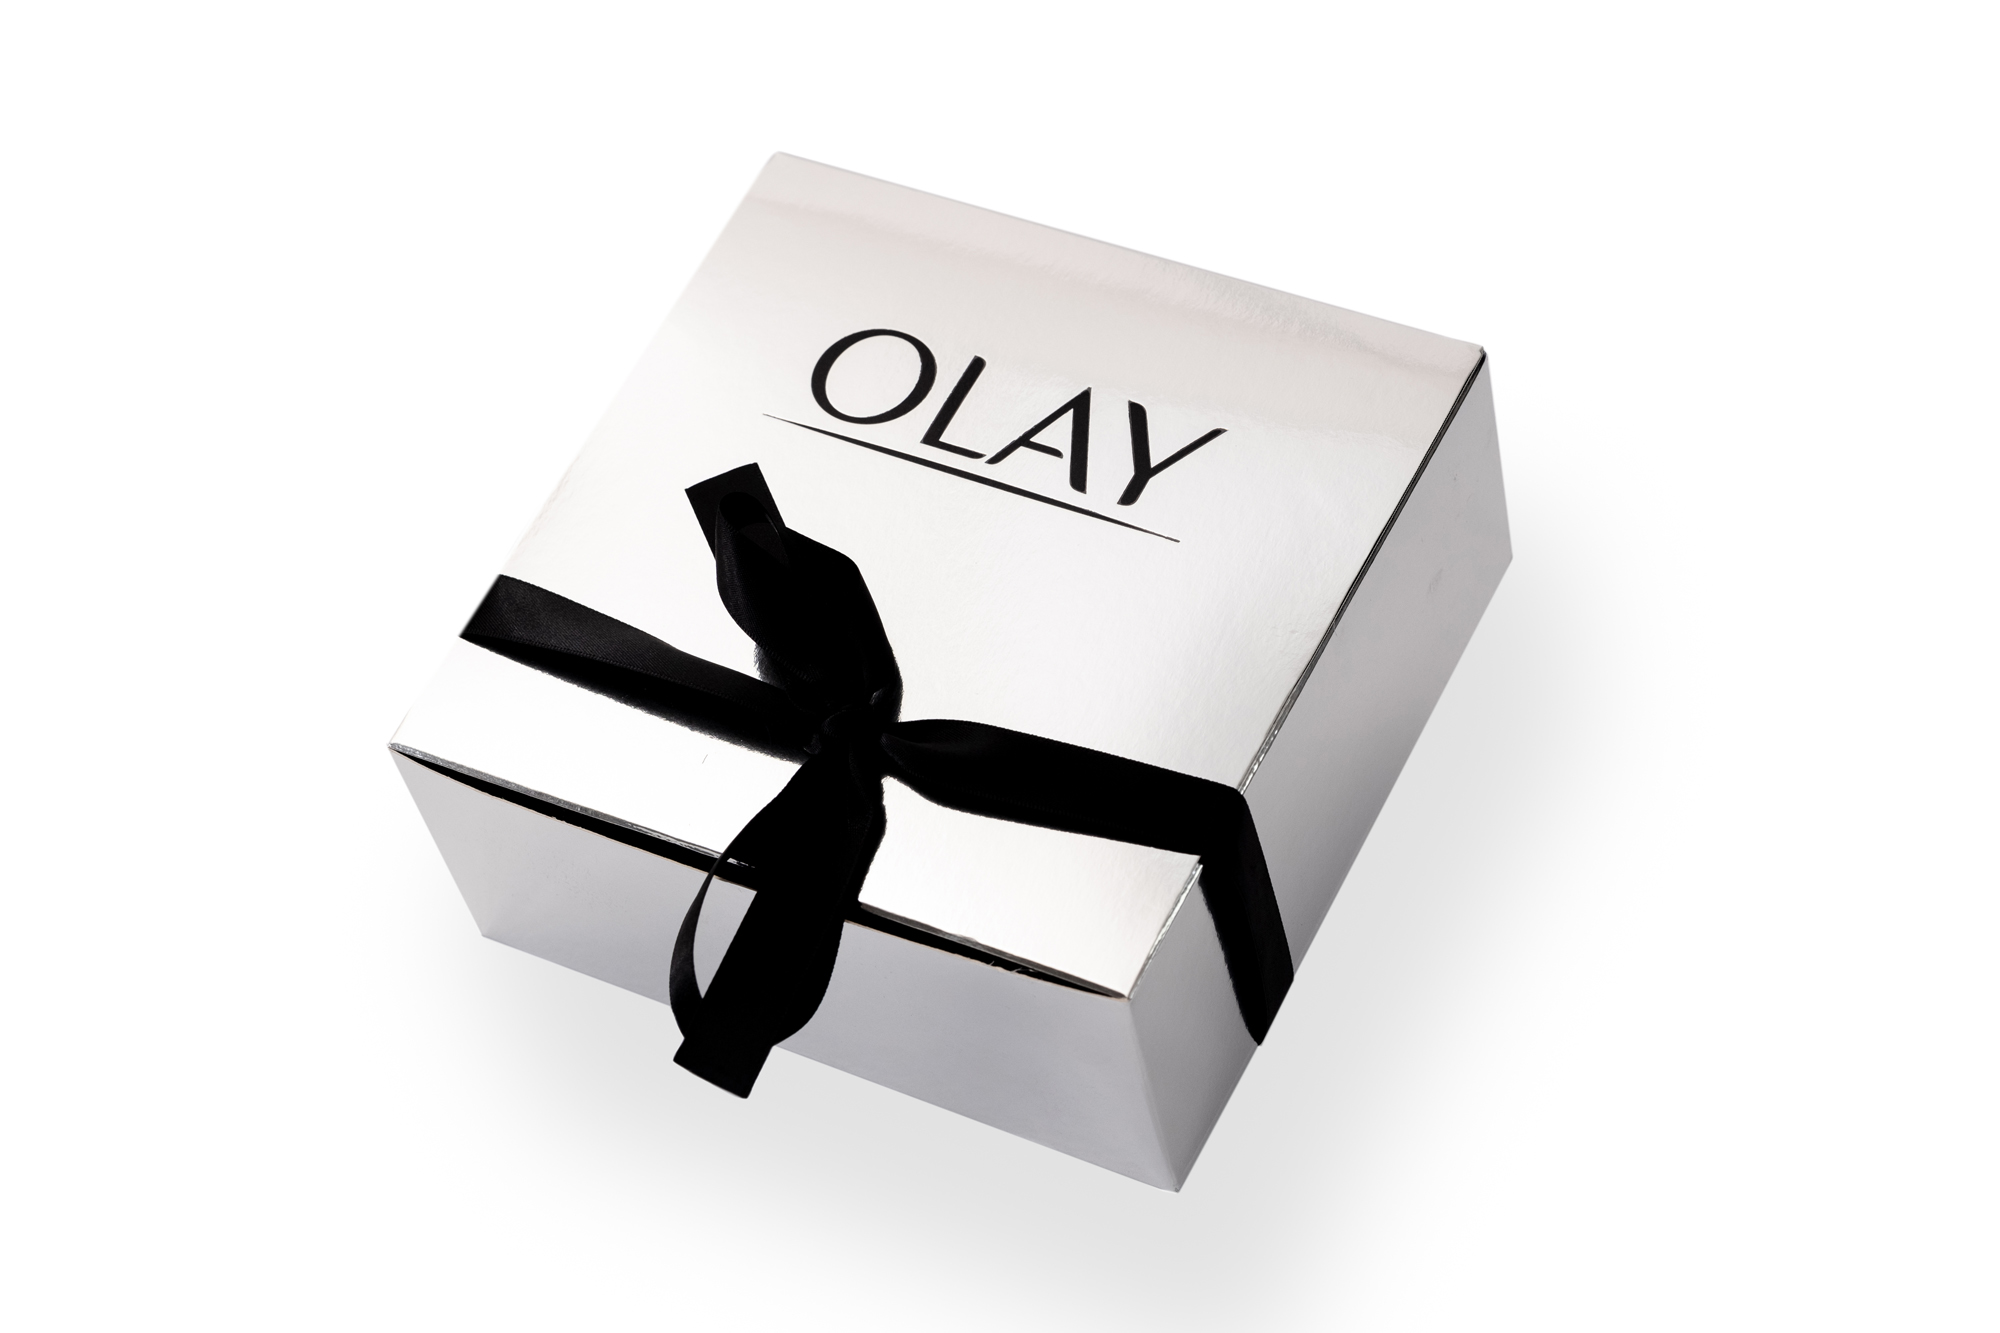 Olay Print for Packaging